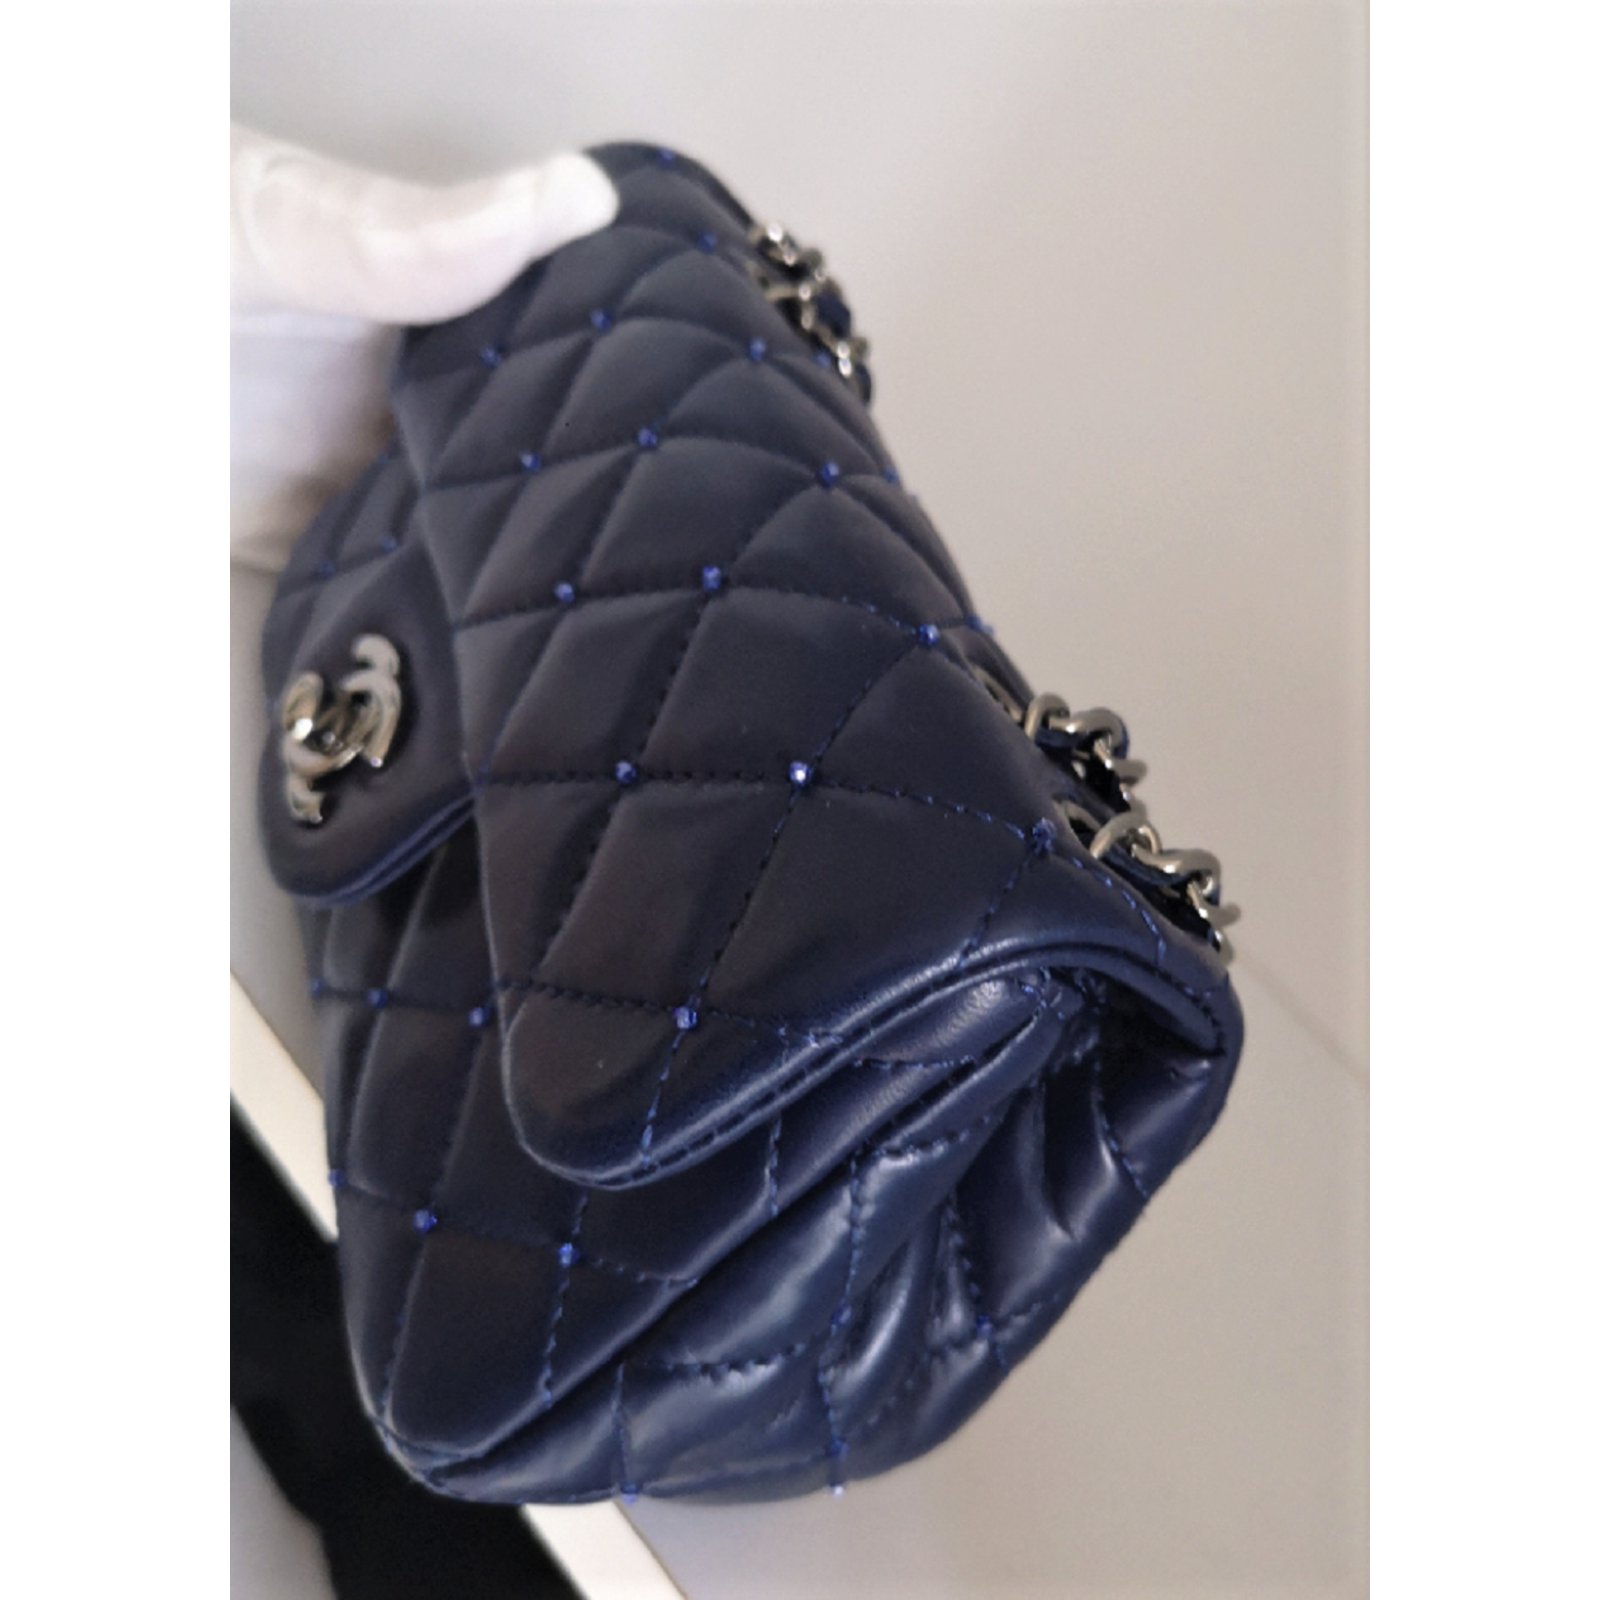 Limited edition Chanel Navy blue mini flap bag with swarovski beads